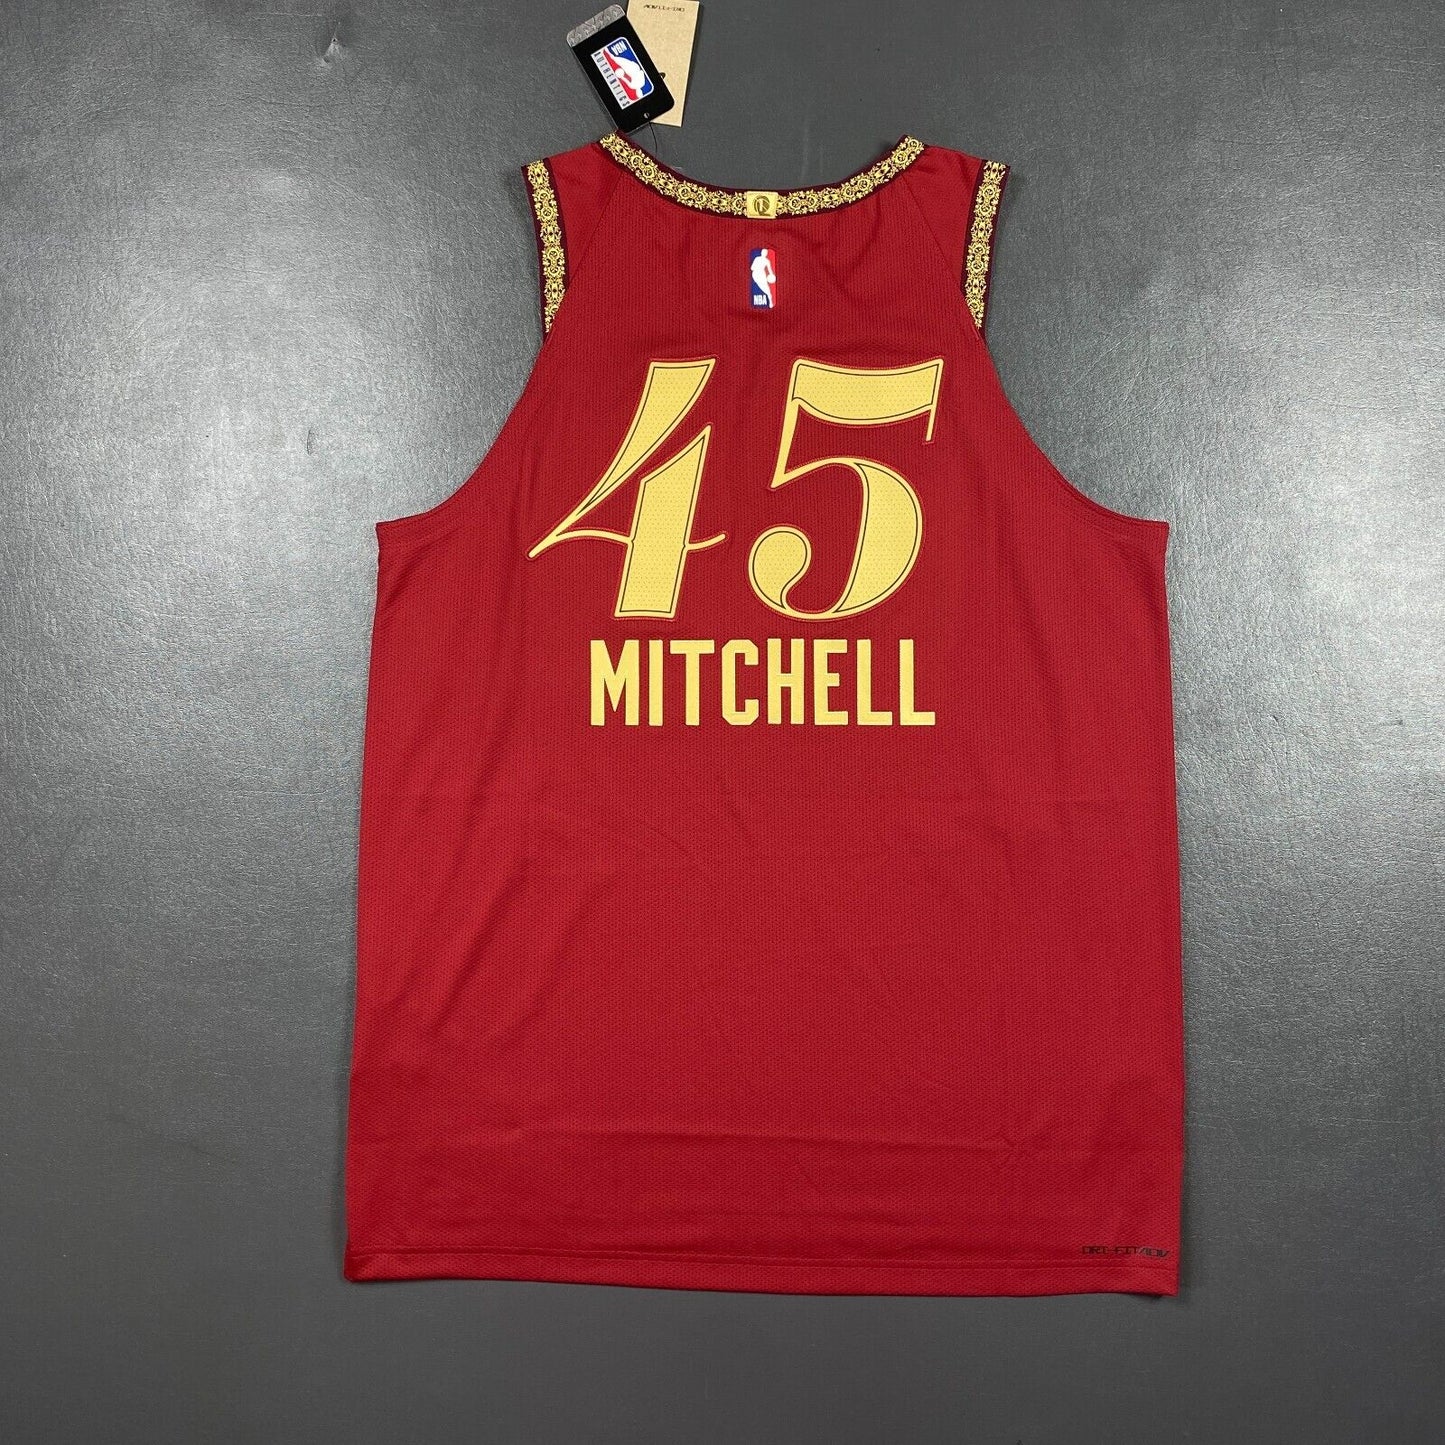 100% Authentic Donovan Mitchell Nike Cavaliers City Edition Jersey Size 52 XL